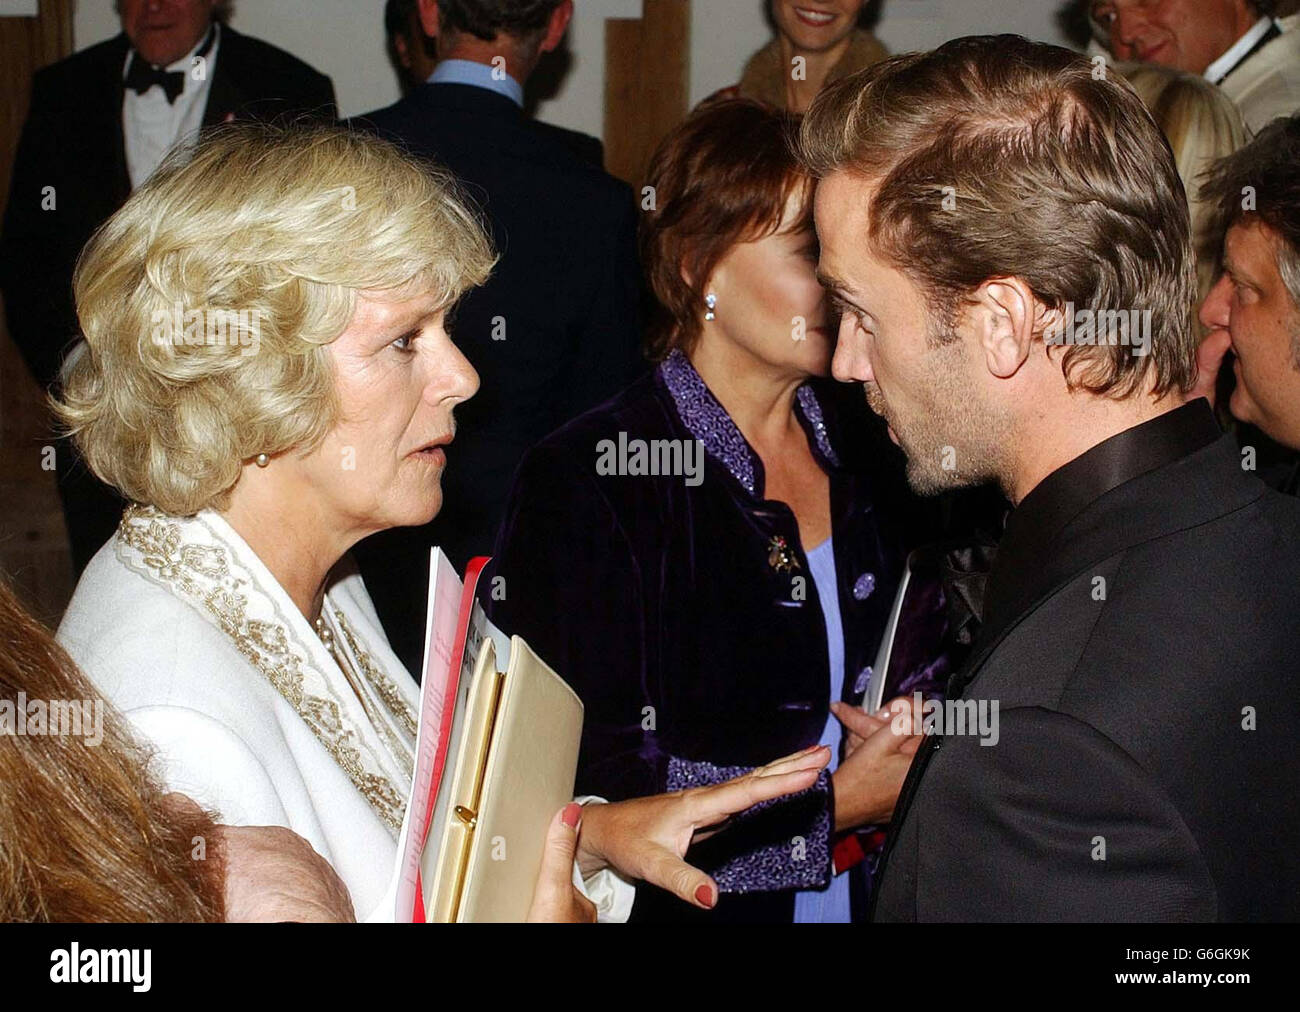 Camilla Parker Bowles meets Joseph Fiennes at the Globe Theatre on London's South Bank, after a Shakespeare Gala evening in aid of the Prince's Trust. Camilla Parker Bowles accompanied The Prince Wales to watch stars of film and stage put on a Shakespearean spectacle with Oscar winner Gwyneth Paltrow joining a host of acclaimed actors who performed scenes from the bard's famous plays. The gala evening has already raised 100,000 in aid of the Prince's Trust, which aims to help disadvantaged youngsters. Stock Photo